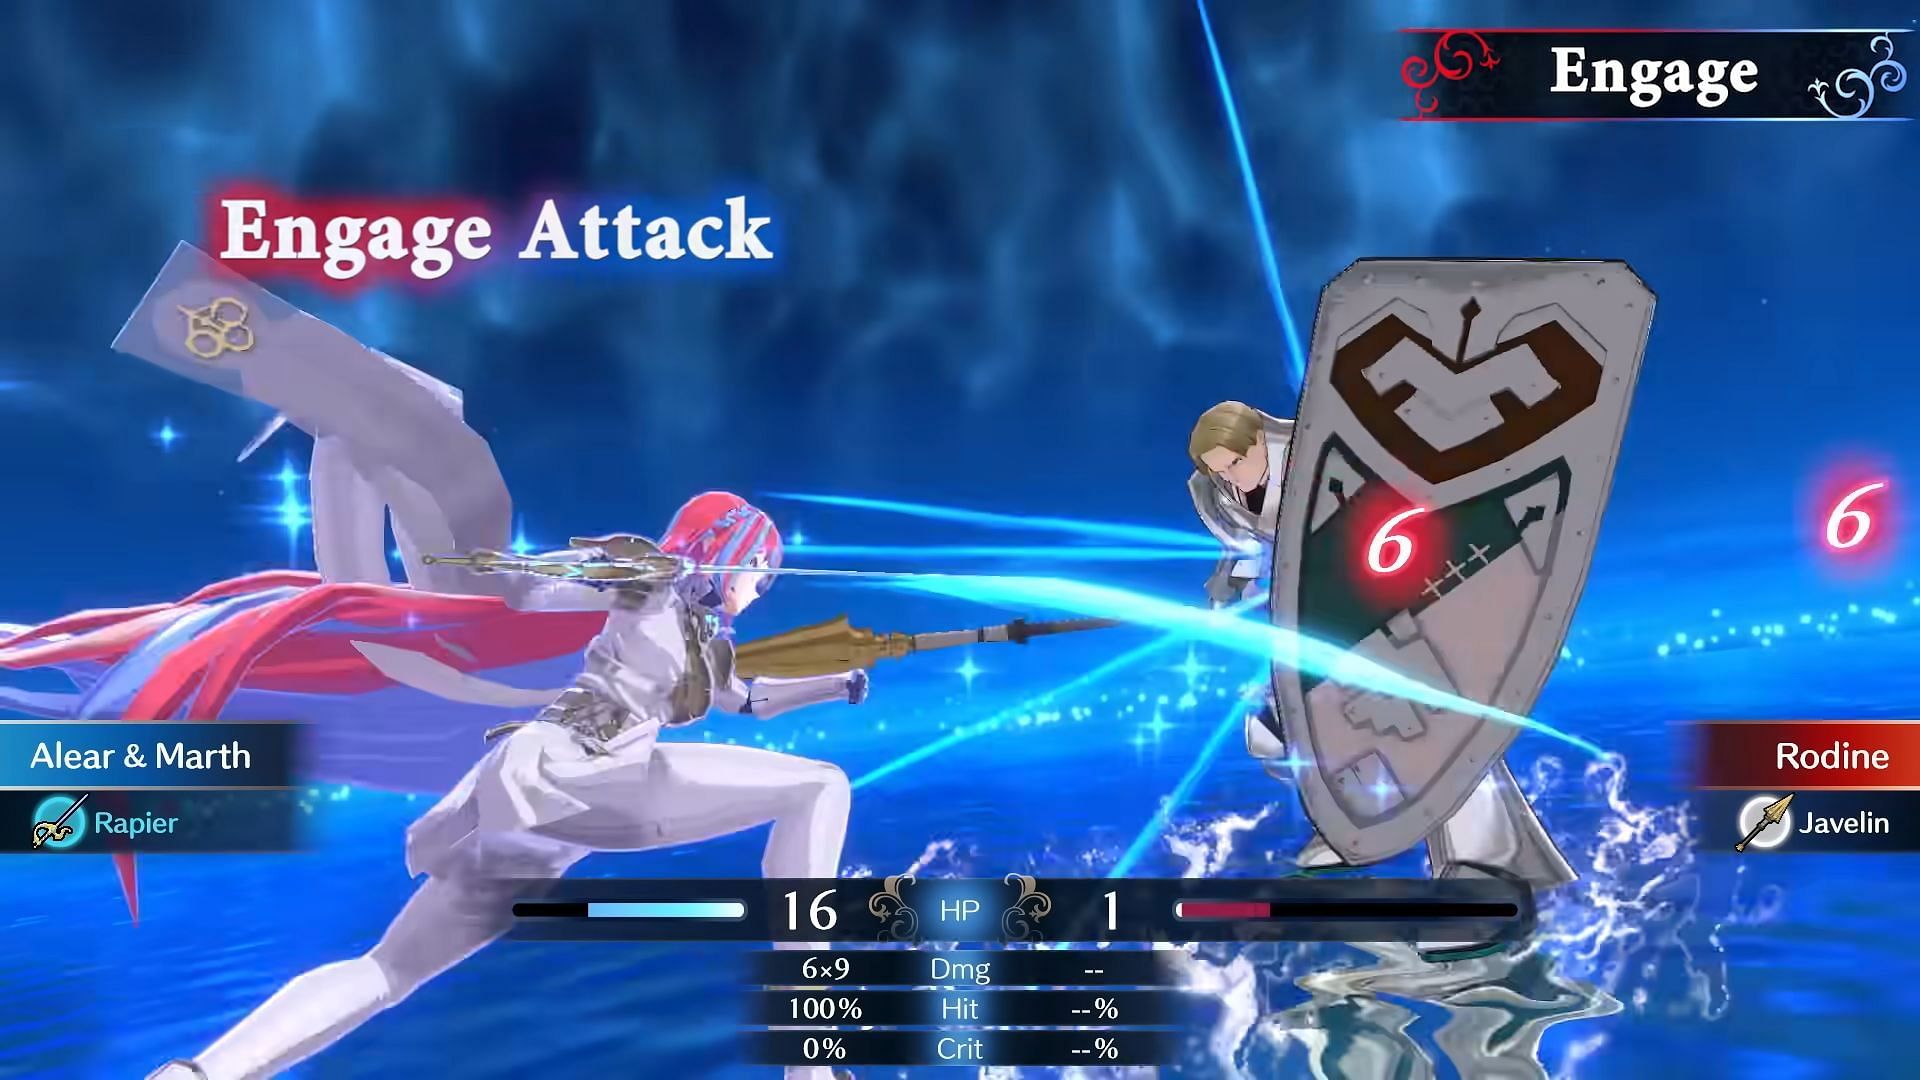 The Engage attack in action (Image via Nintendo)